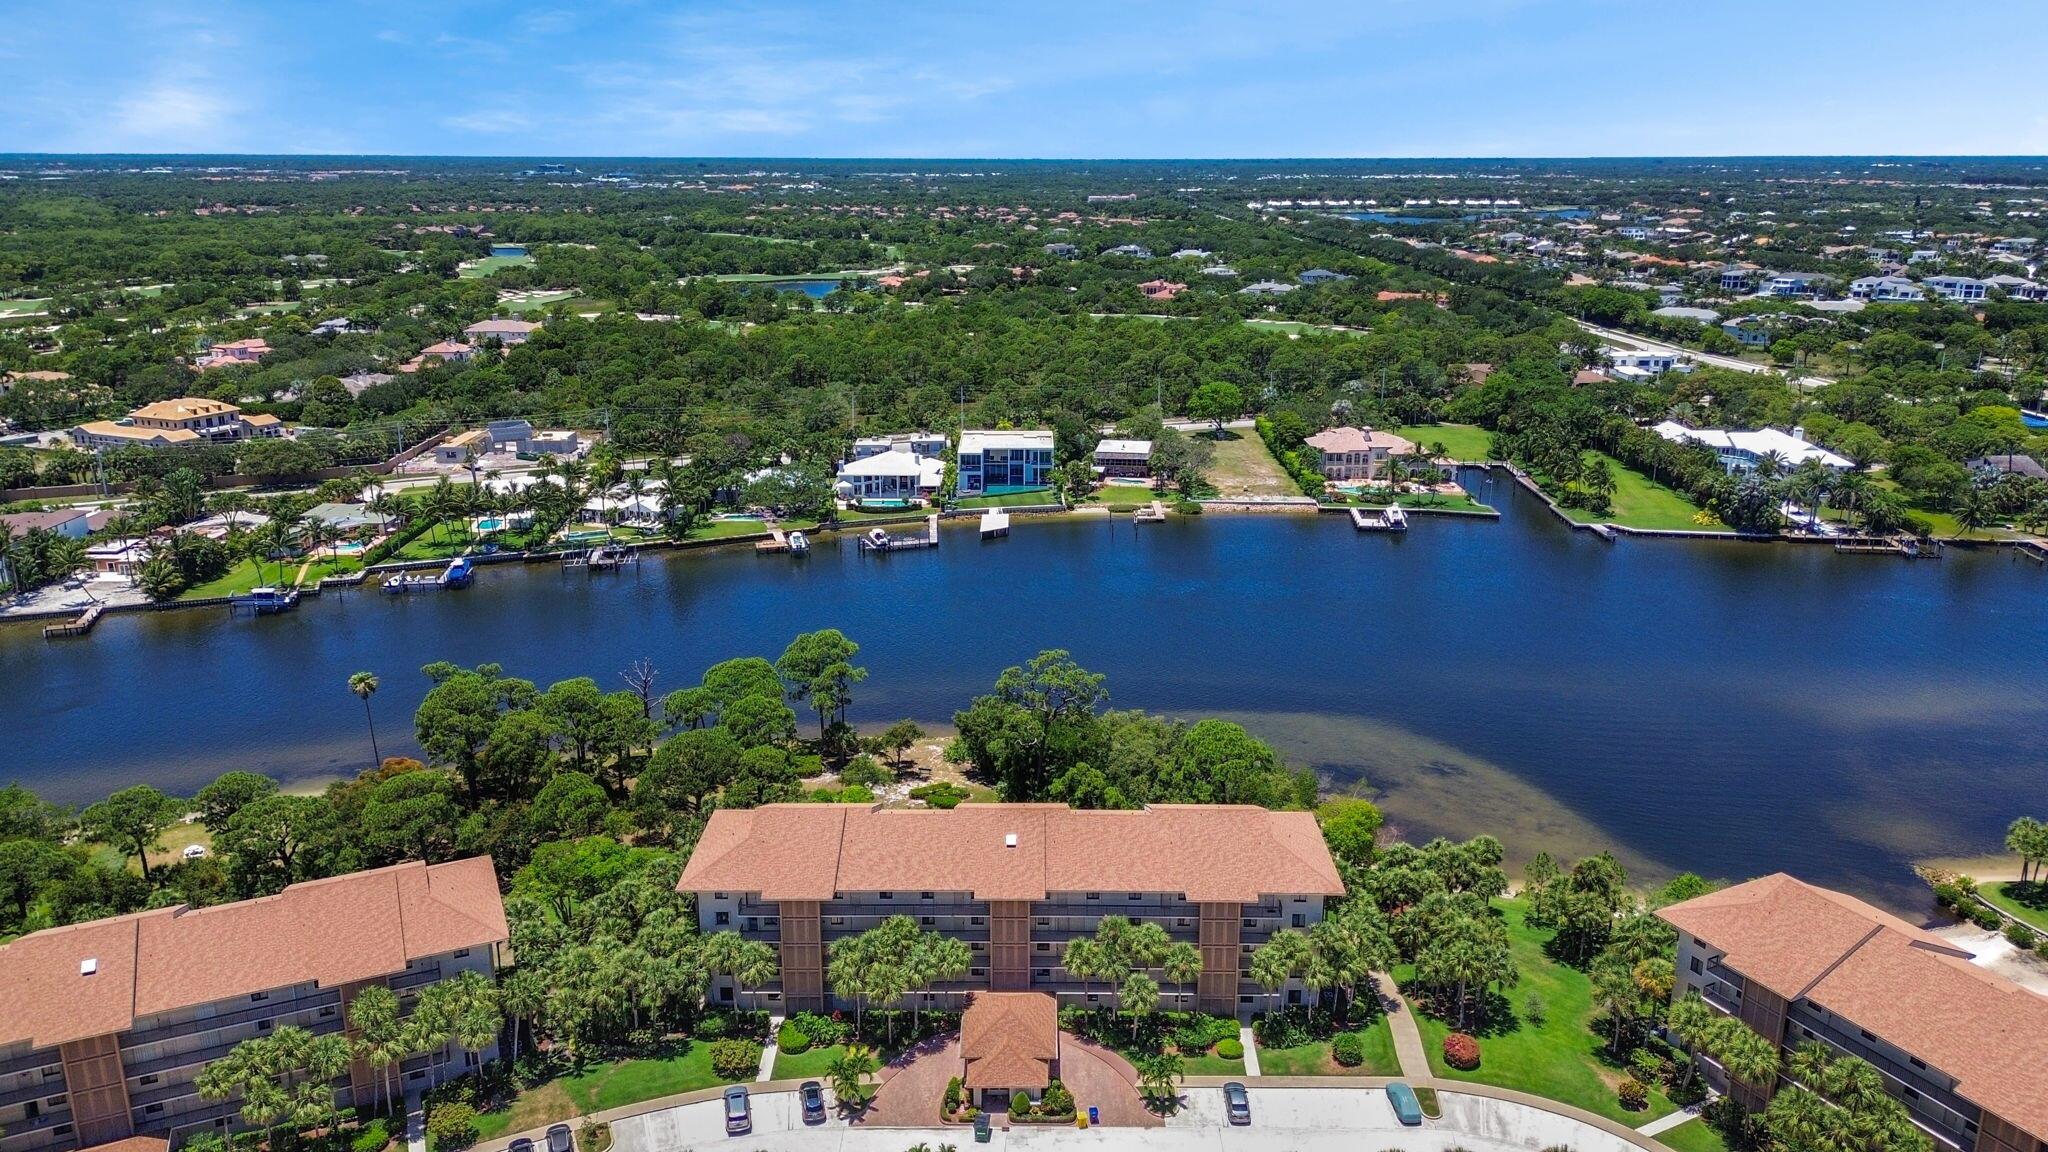 Stunning views from this fully furnished Marina condo overlooking the intracoastal.  Watch the boats sail by and enjoy beautiful sunsets from your private balcony. Well-maintained waterfront condo with spacious bonus/laundry Room perfect for overnight guests or extra storage. This walk-to-the-beach community has four pools, two tennis courts, beach access with picnic table and grill area.  Minutes to ocean, shopping, dining, Juno Pier, Harborside. OWNER WANTS A QUICK SALE!!!!